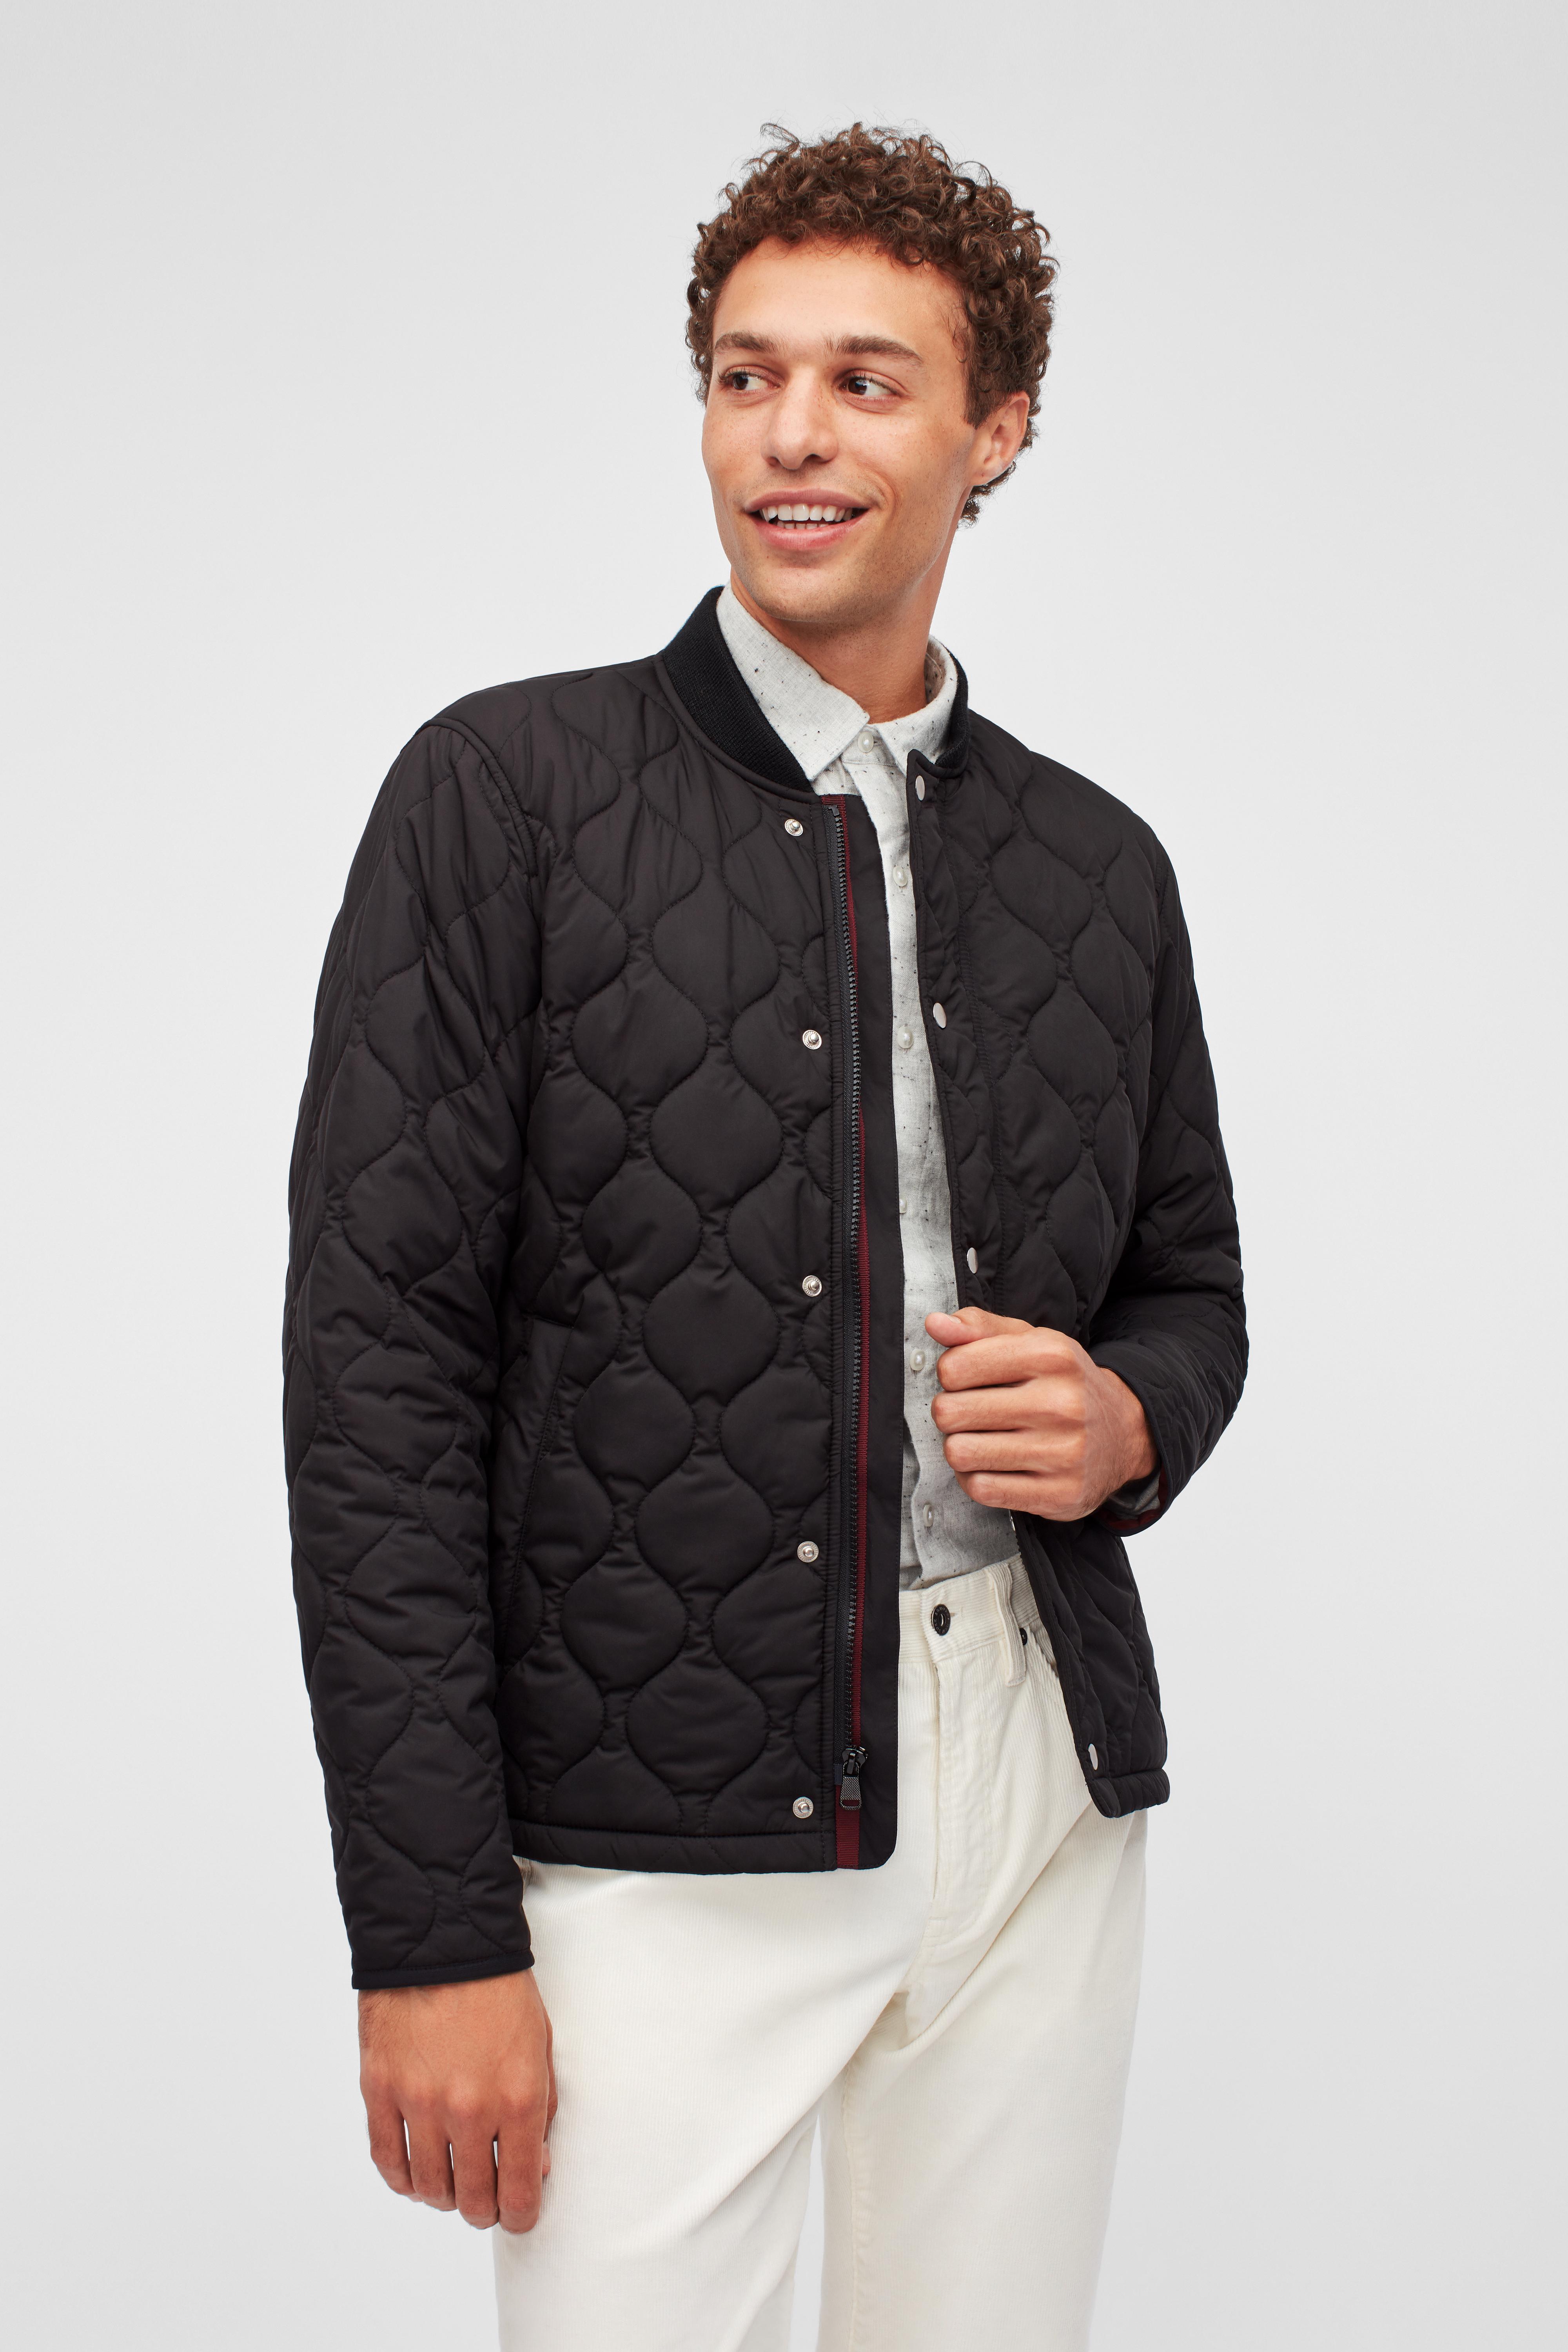 Bonobos Synthetic The Quilted Bomber in Black for Men - Lyst